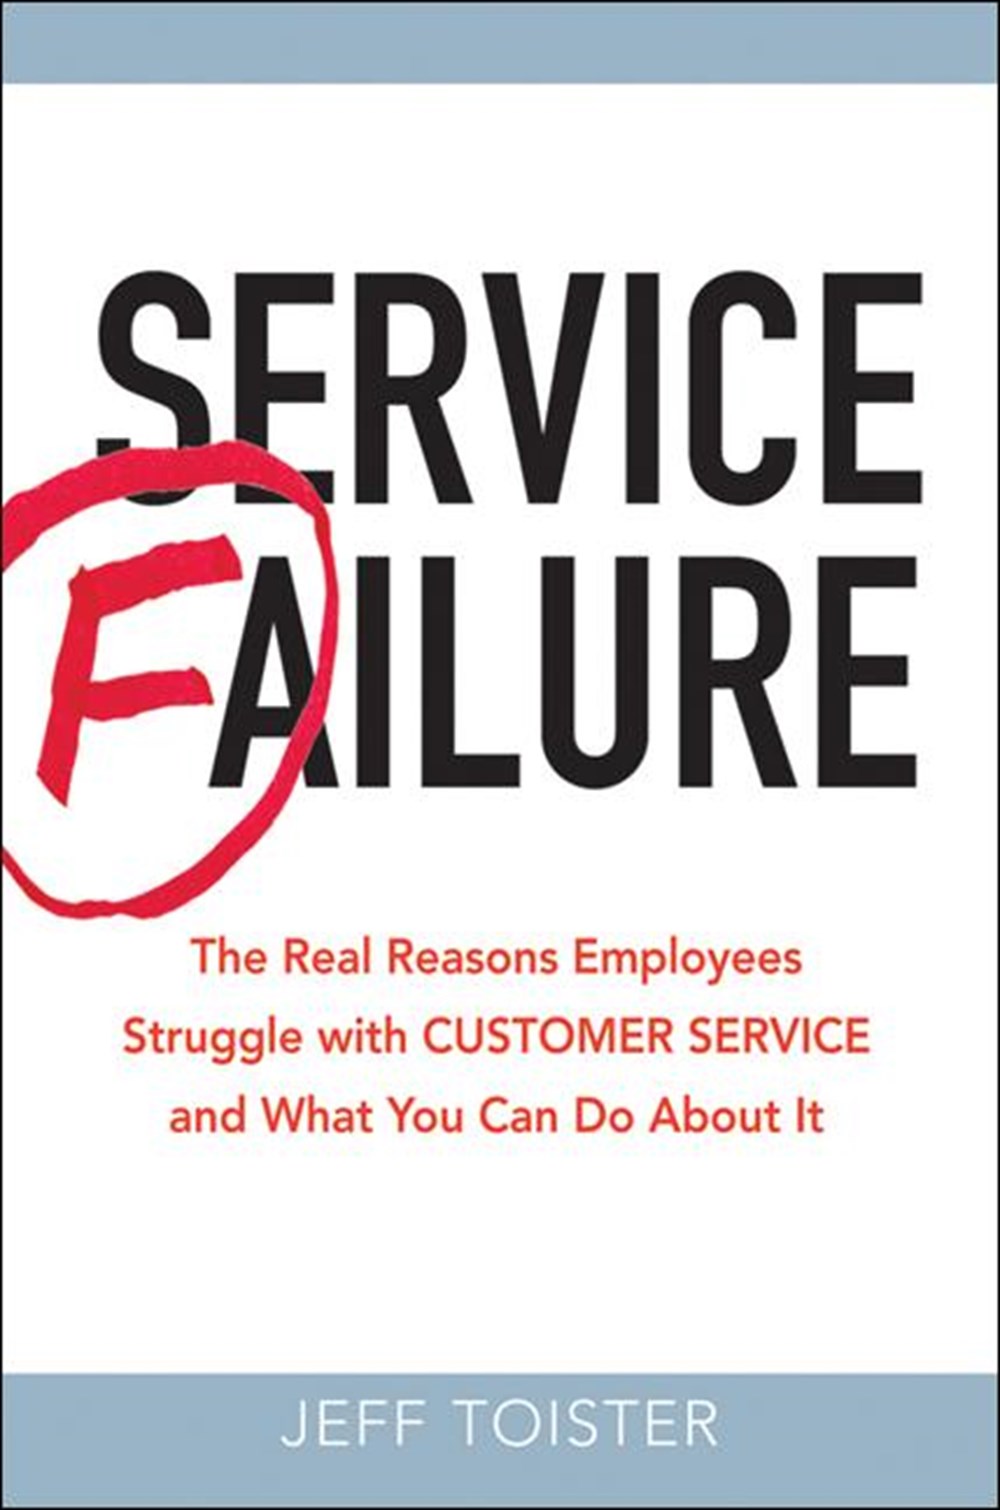 Service Failure: The Real Reasons Employees Struggle with Customer Service and What You Can Do about